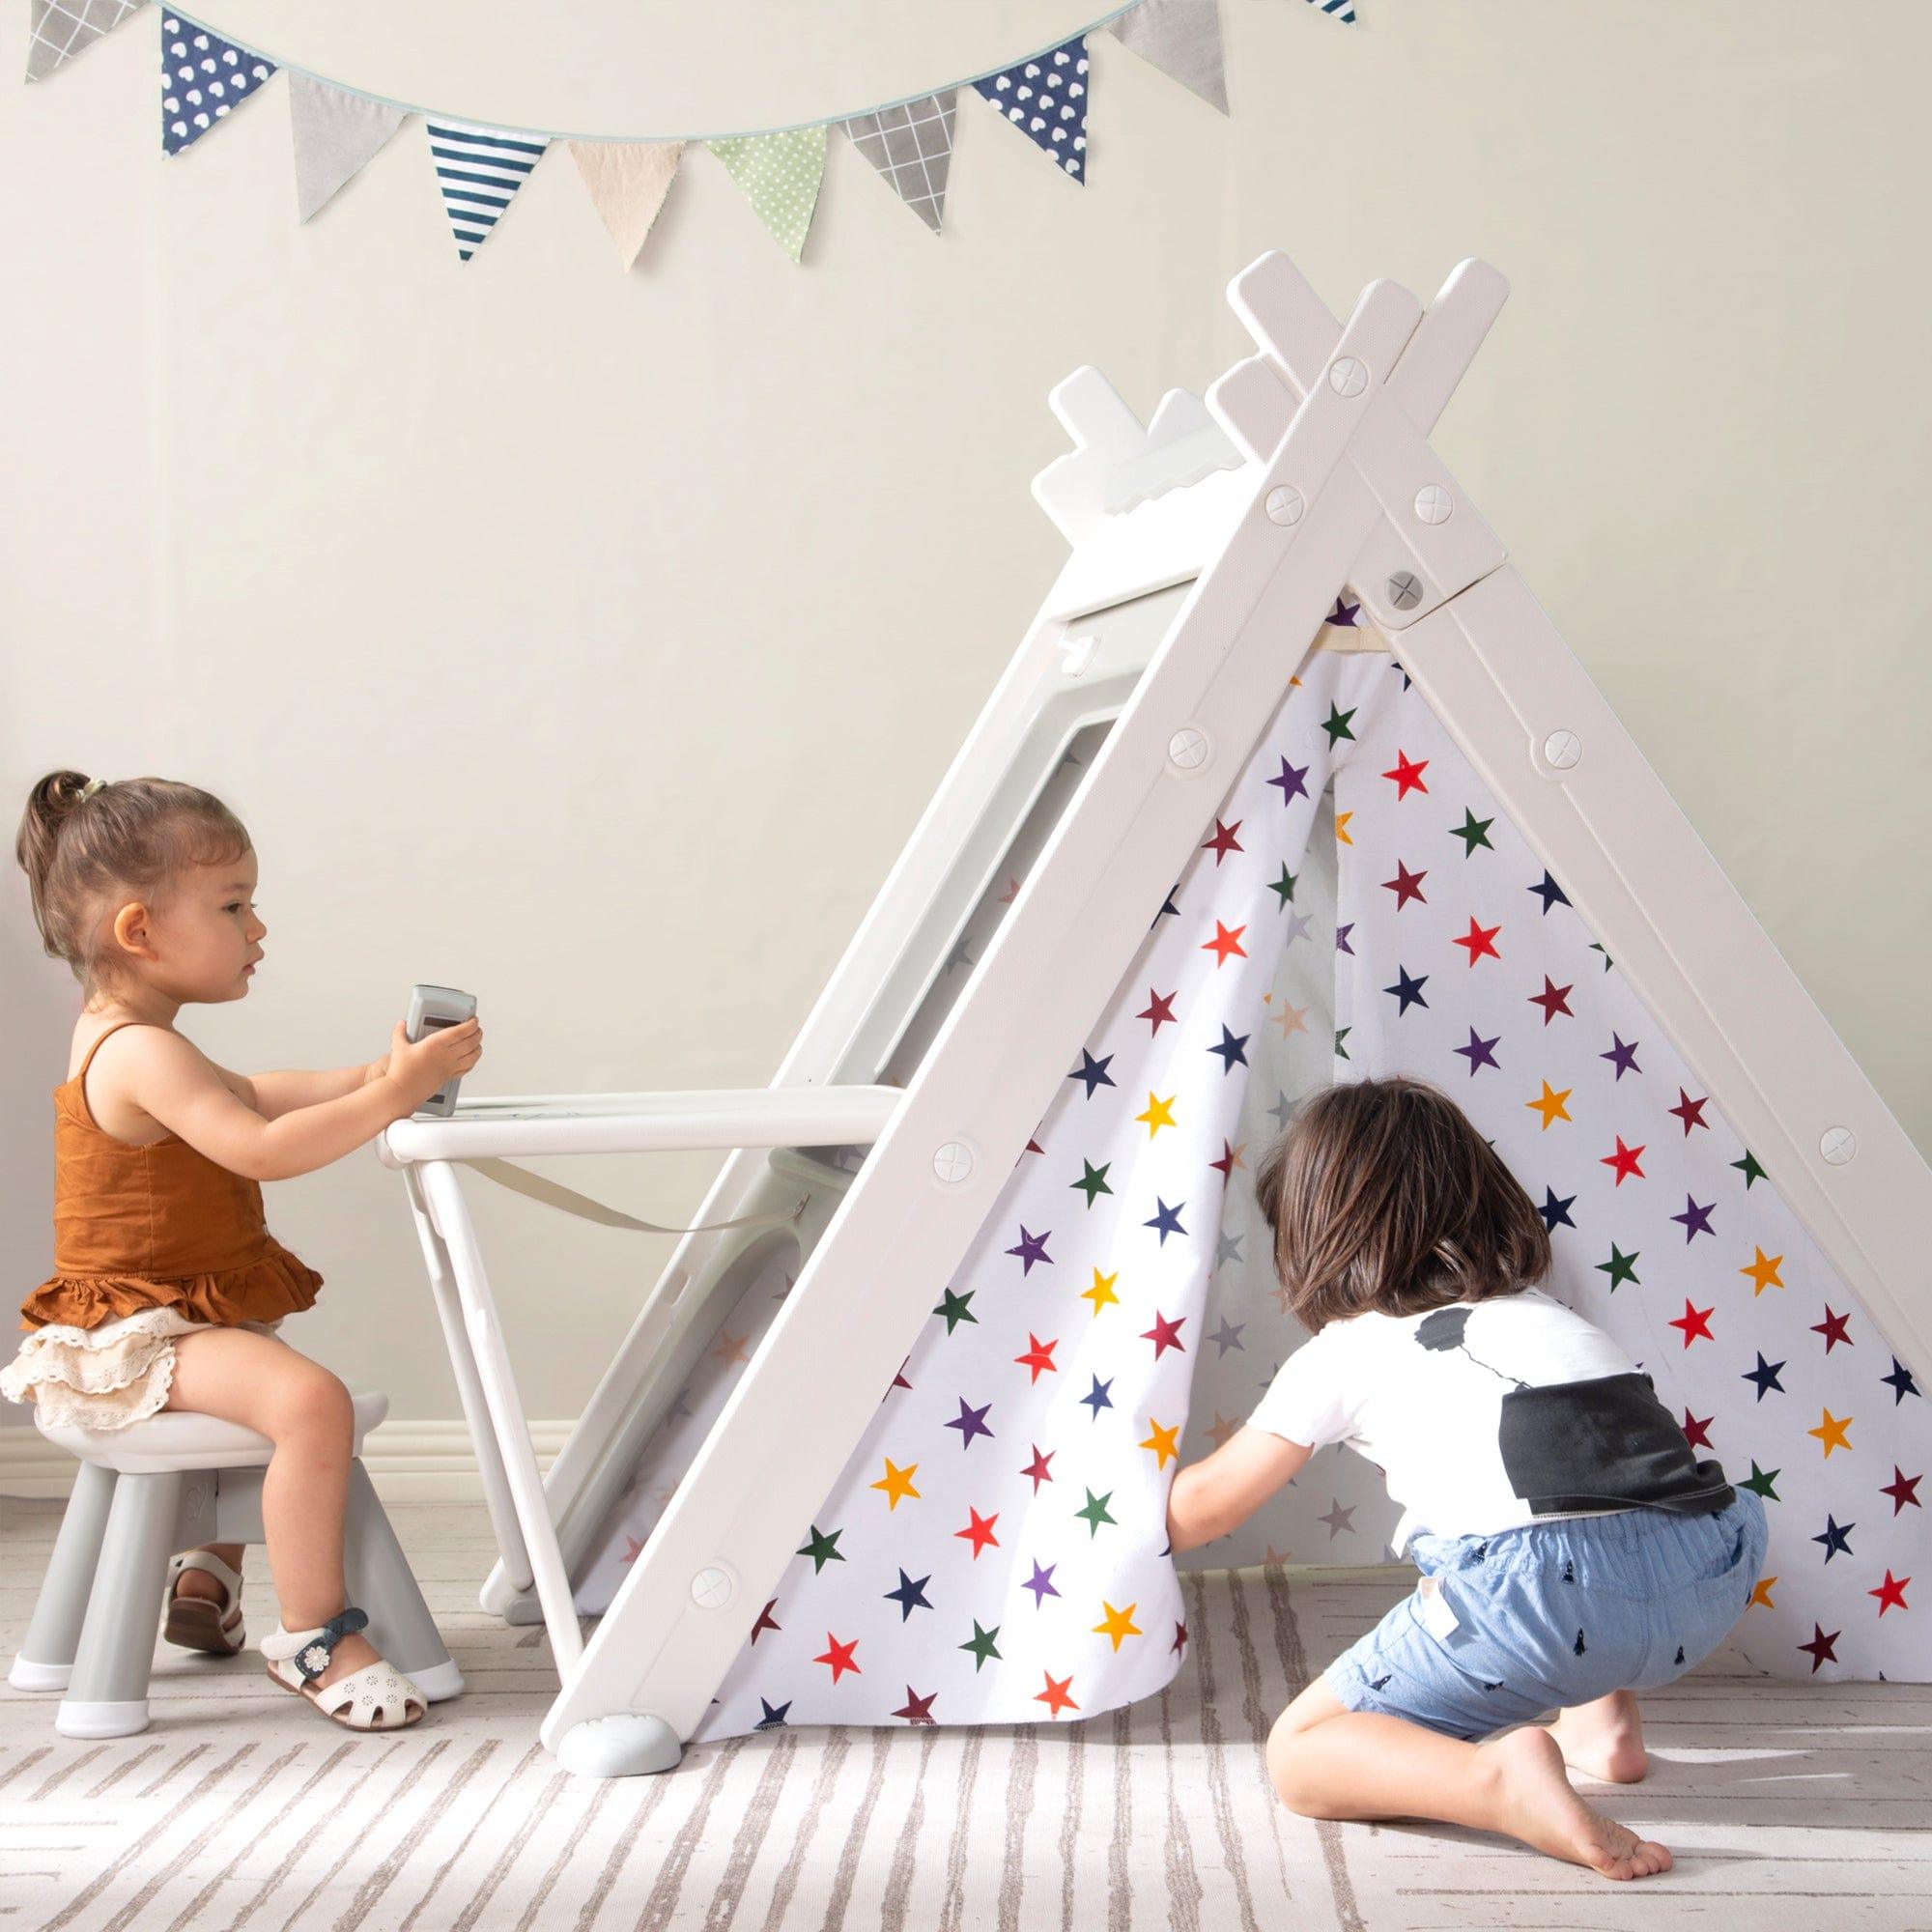 Shop Kids Play Tent - 4 in 1 Teepee Tent with Stool and Climber, Foldable Playhouse Tent for Boys & Girls Mademoiselle Home Decor